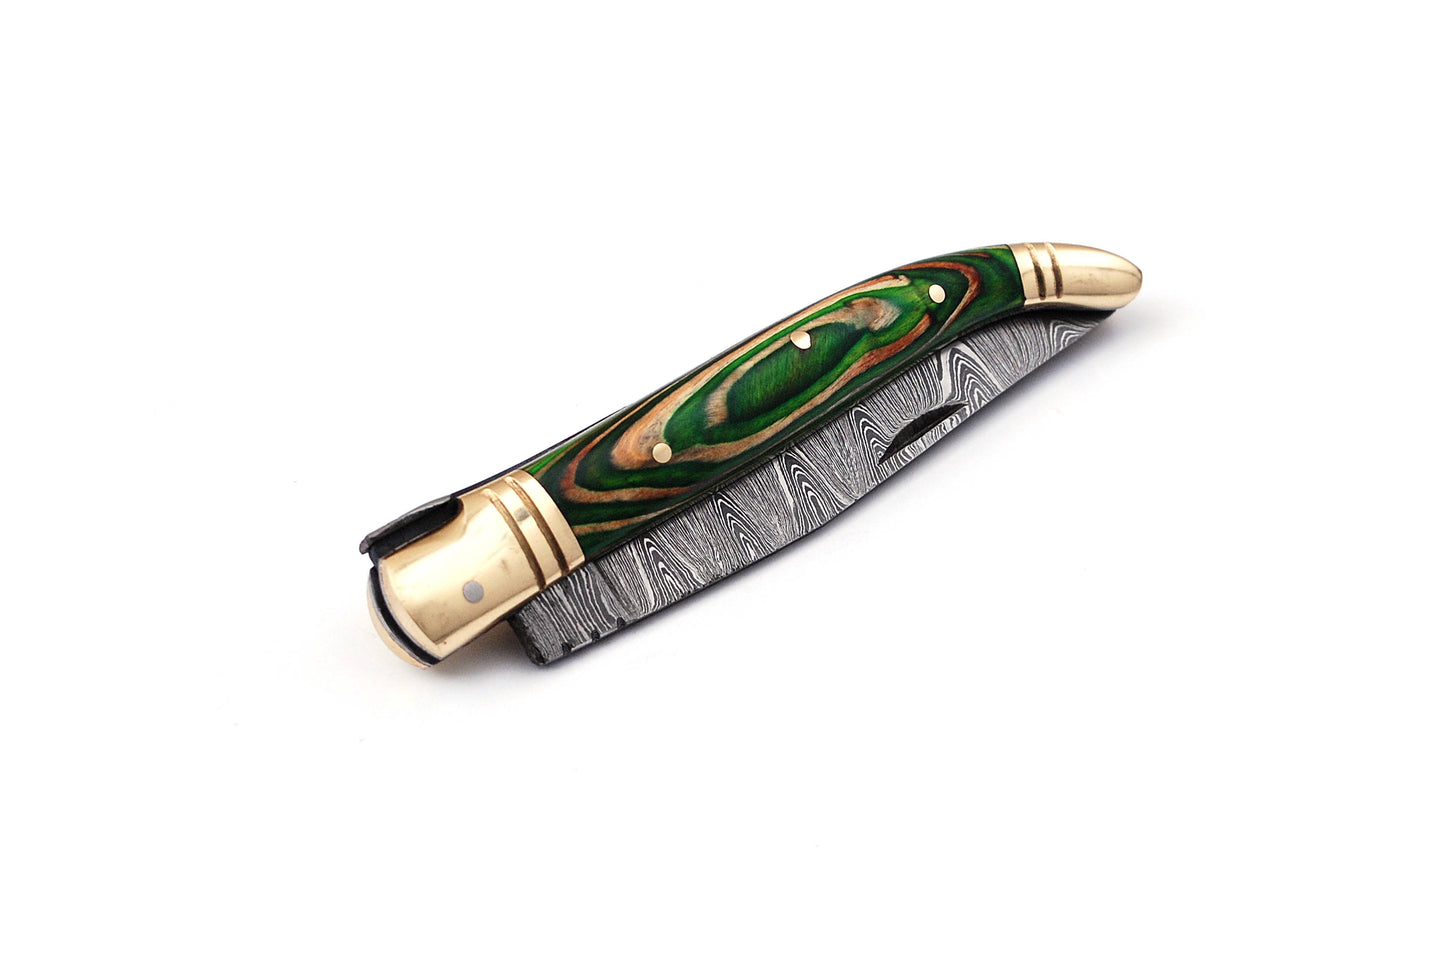 Folding Damascus steel knife, 8.5" Long with 4" hand forged custom twist pattern Blade.2 tone green wood scale with brass bolster, Cow hide leather sheath included